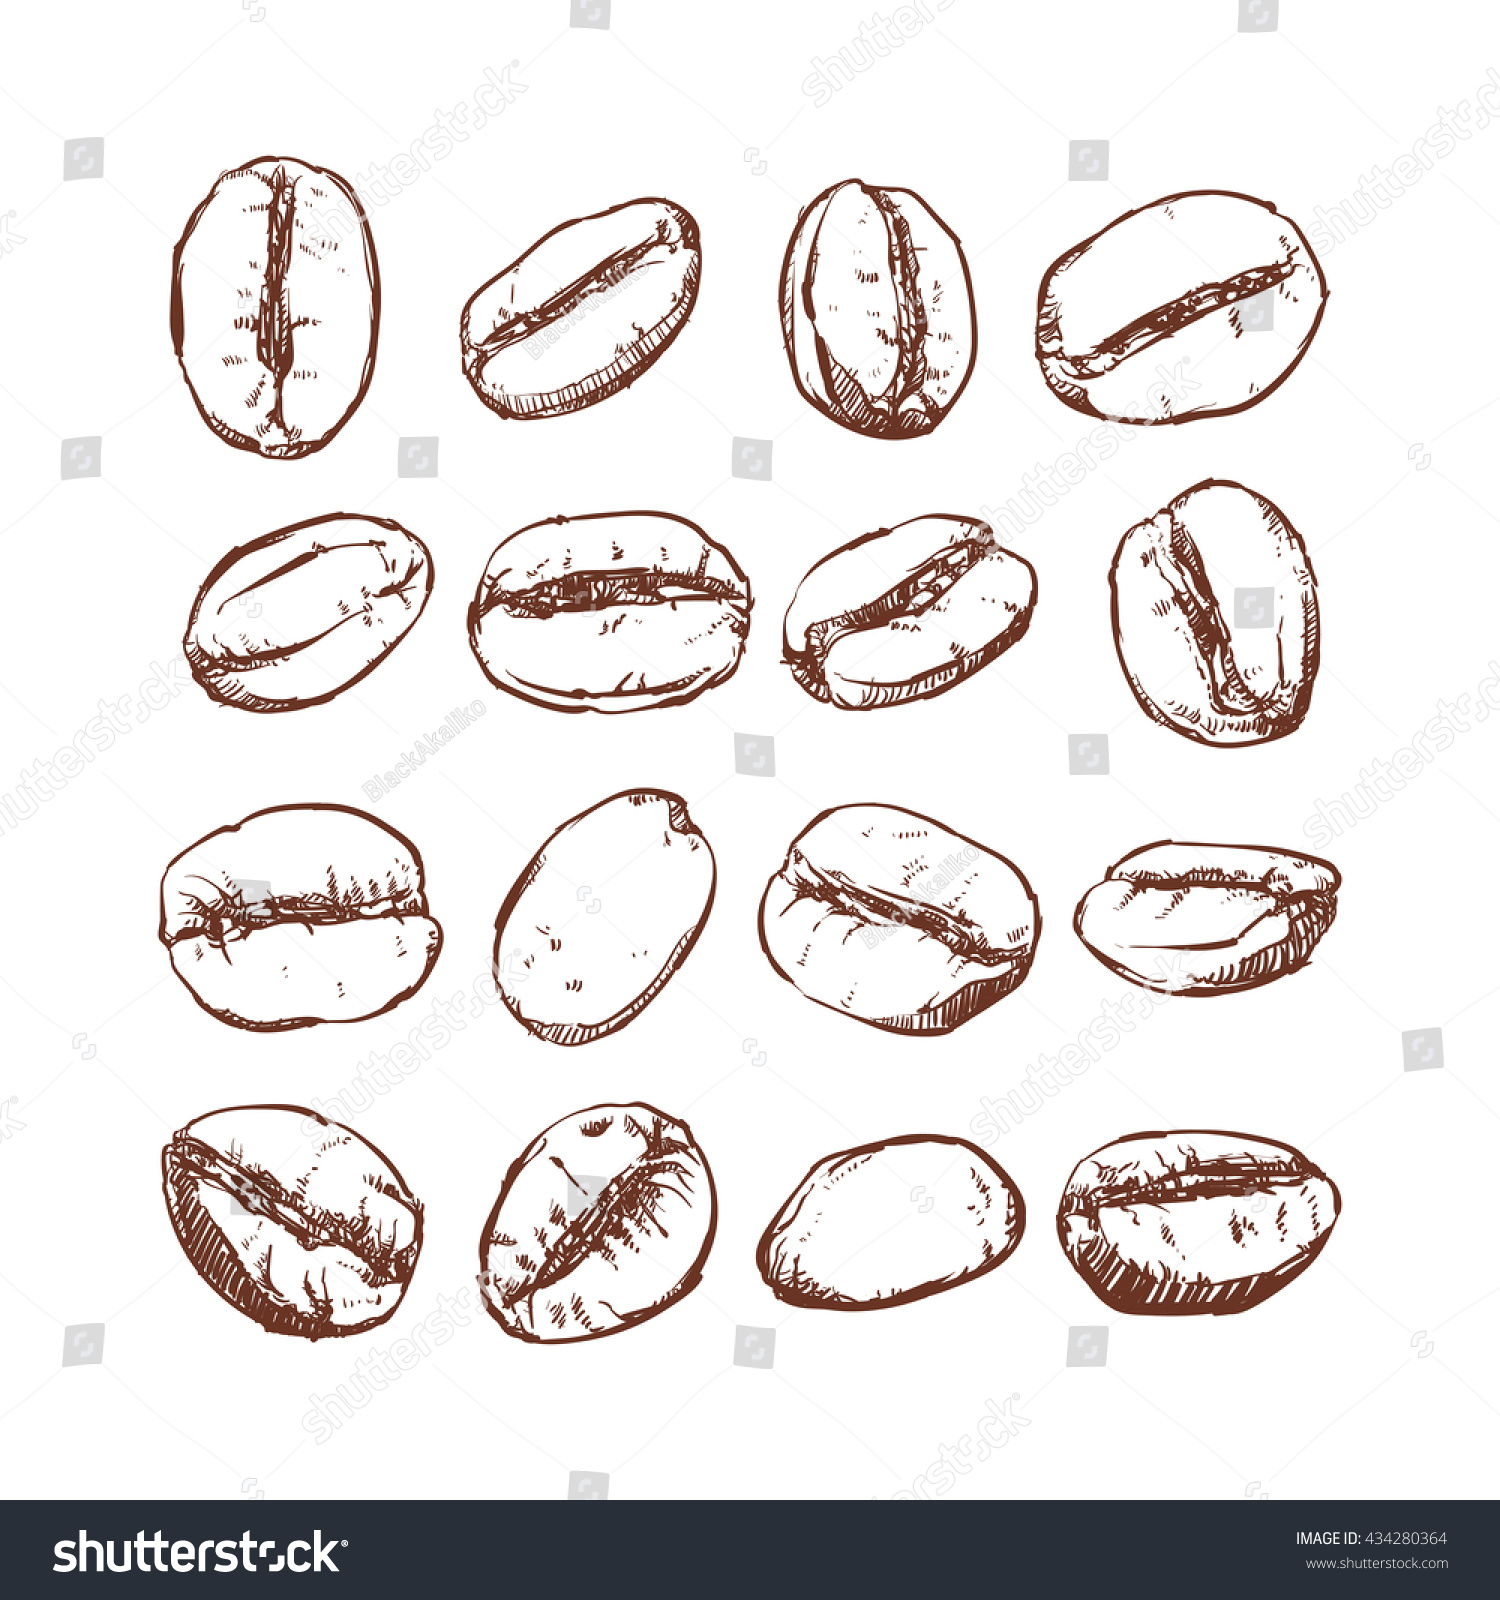 Coffee Bean Isolated Hand Drawn Vector Stock Vector (Royalty Free